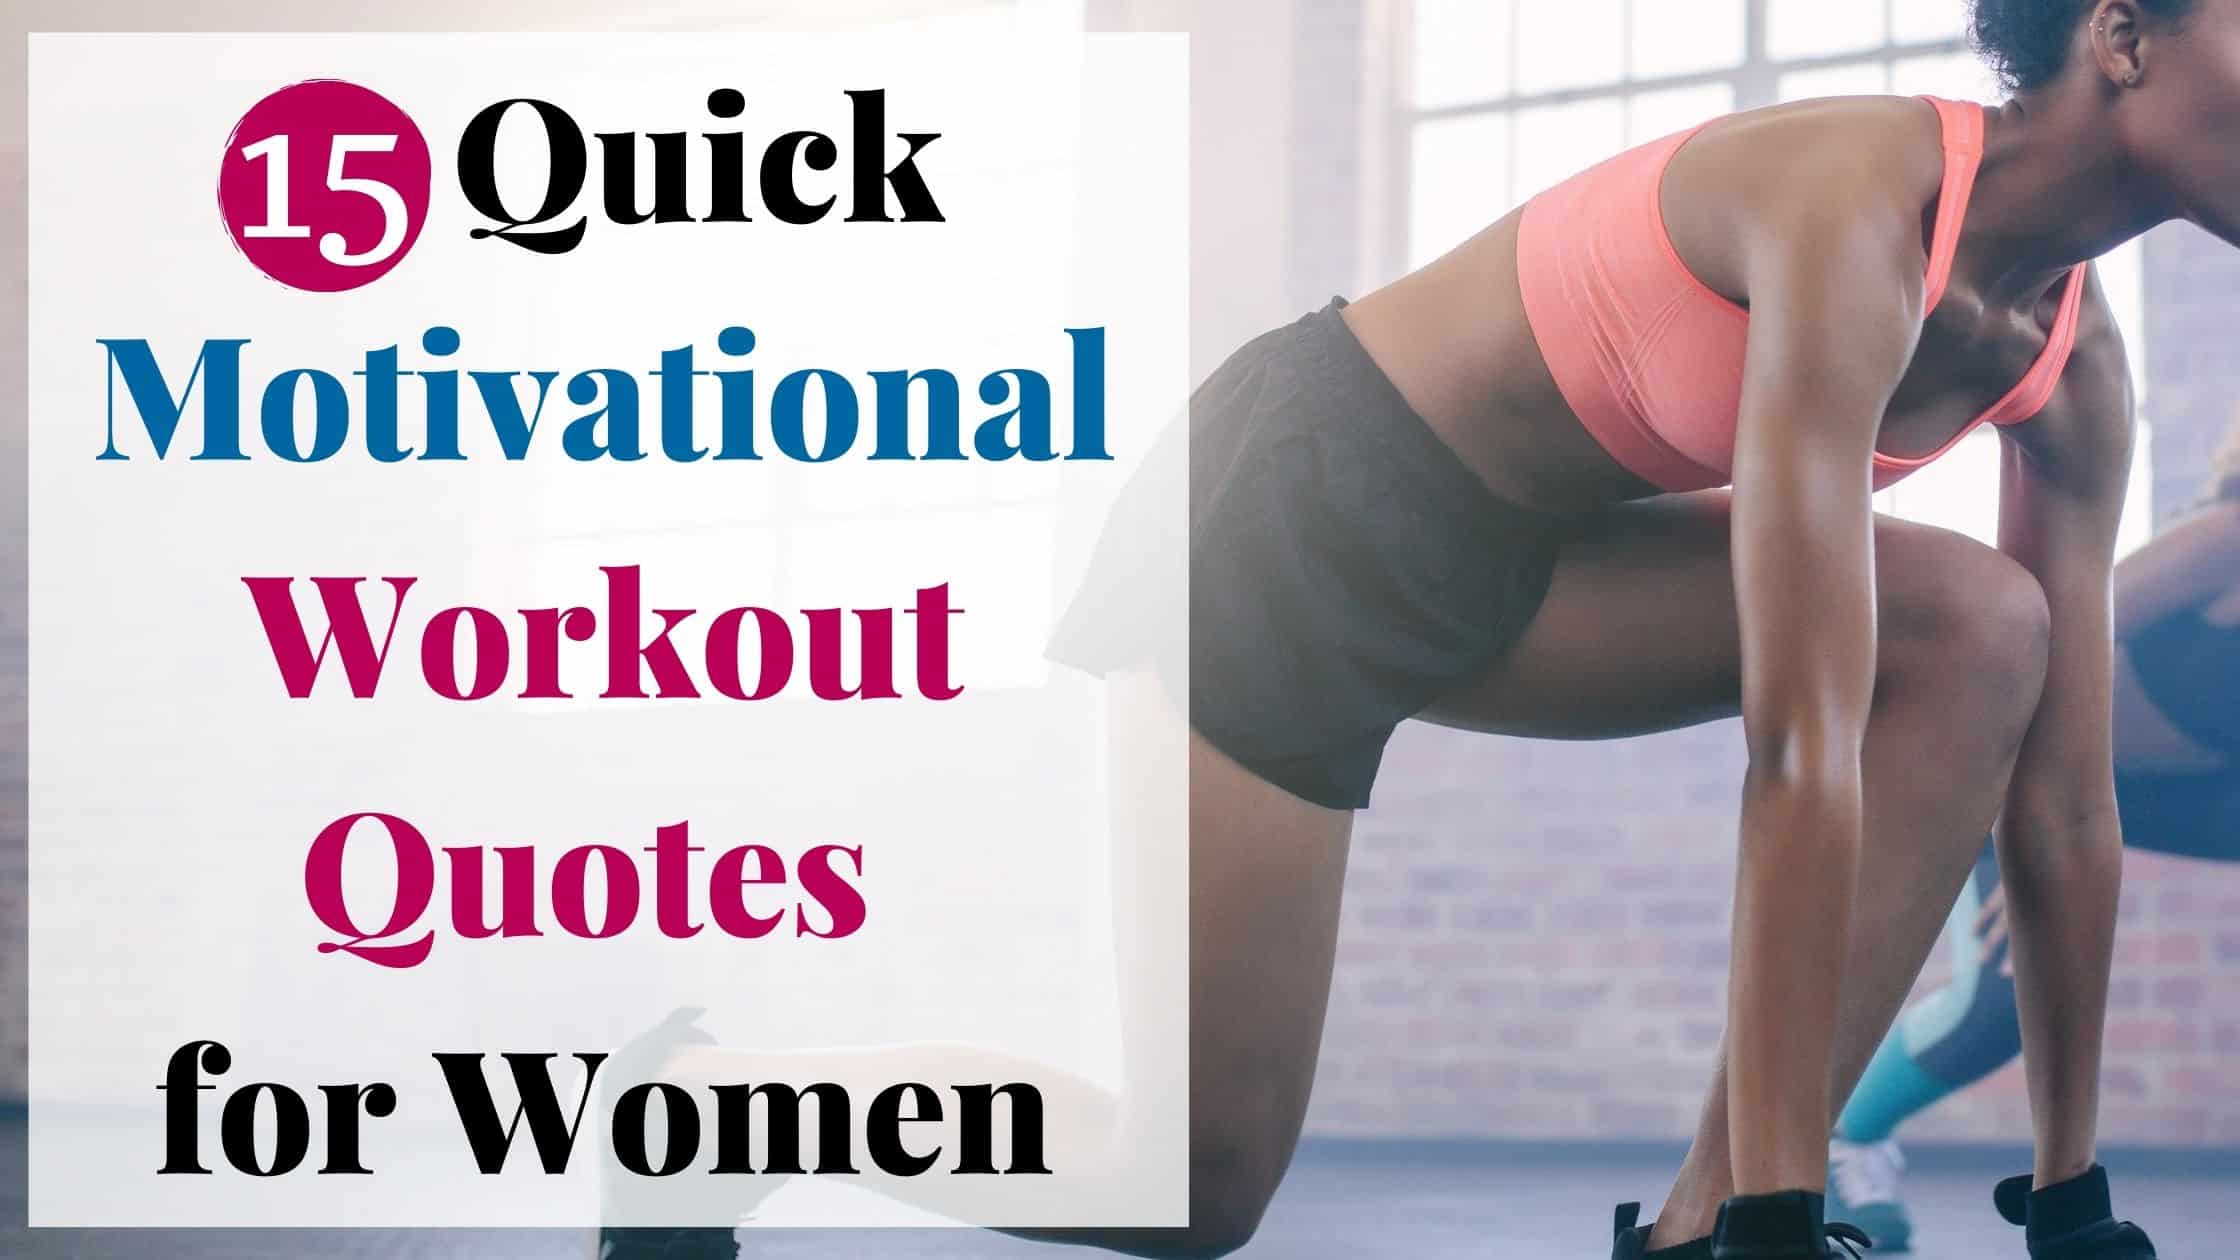 15 Quick Motivational Workout Quotes for Women